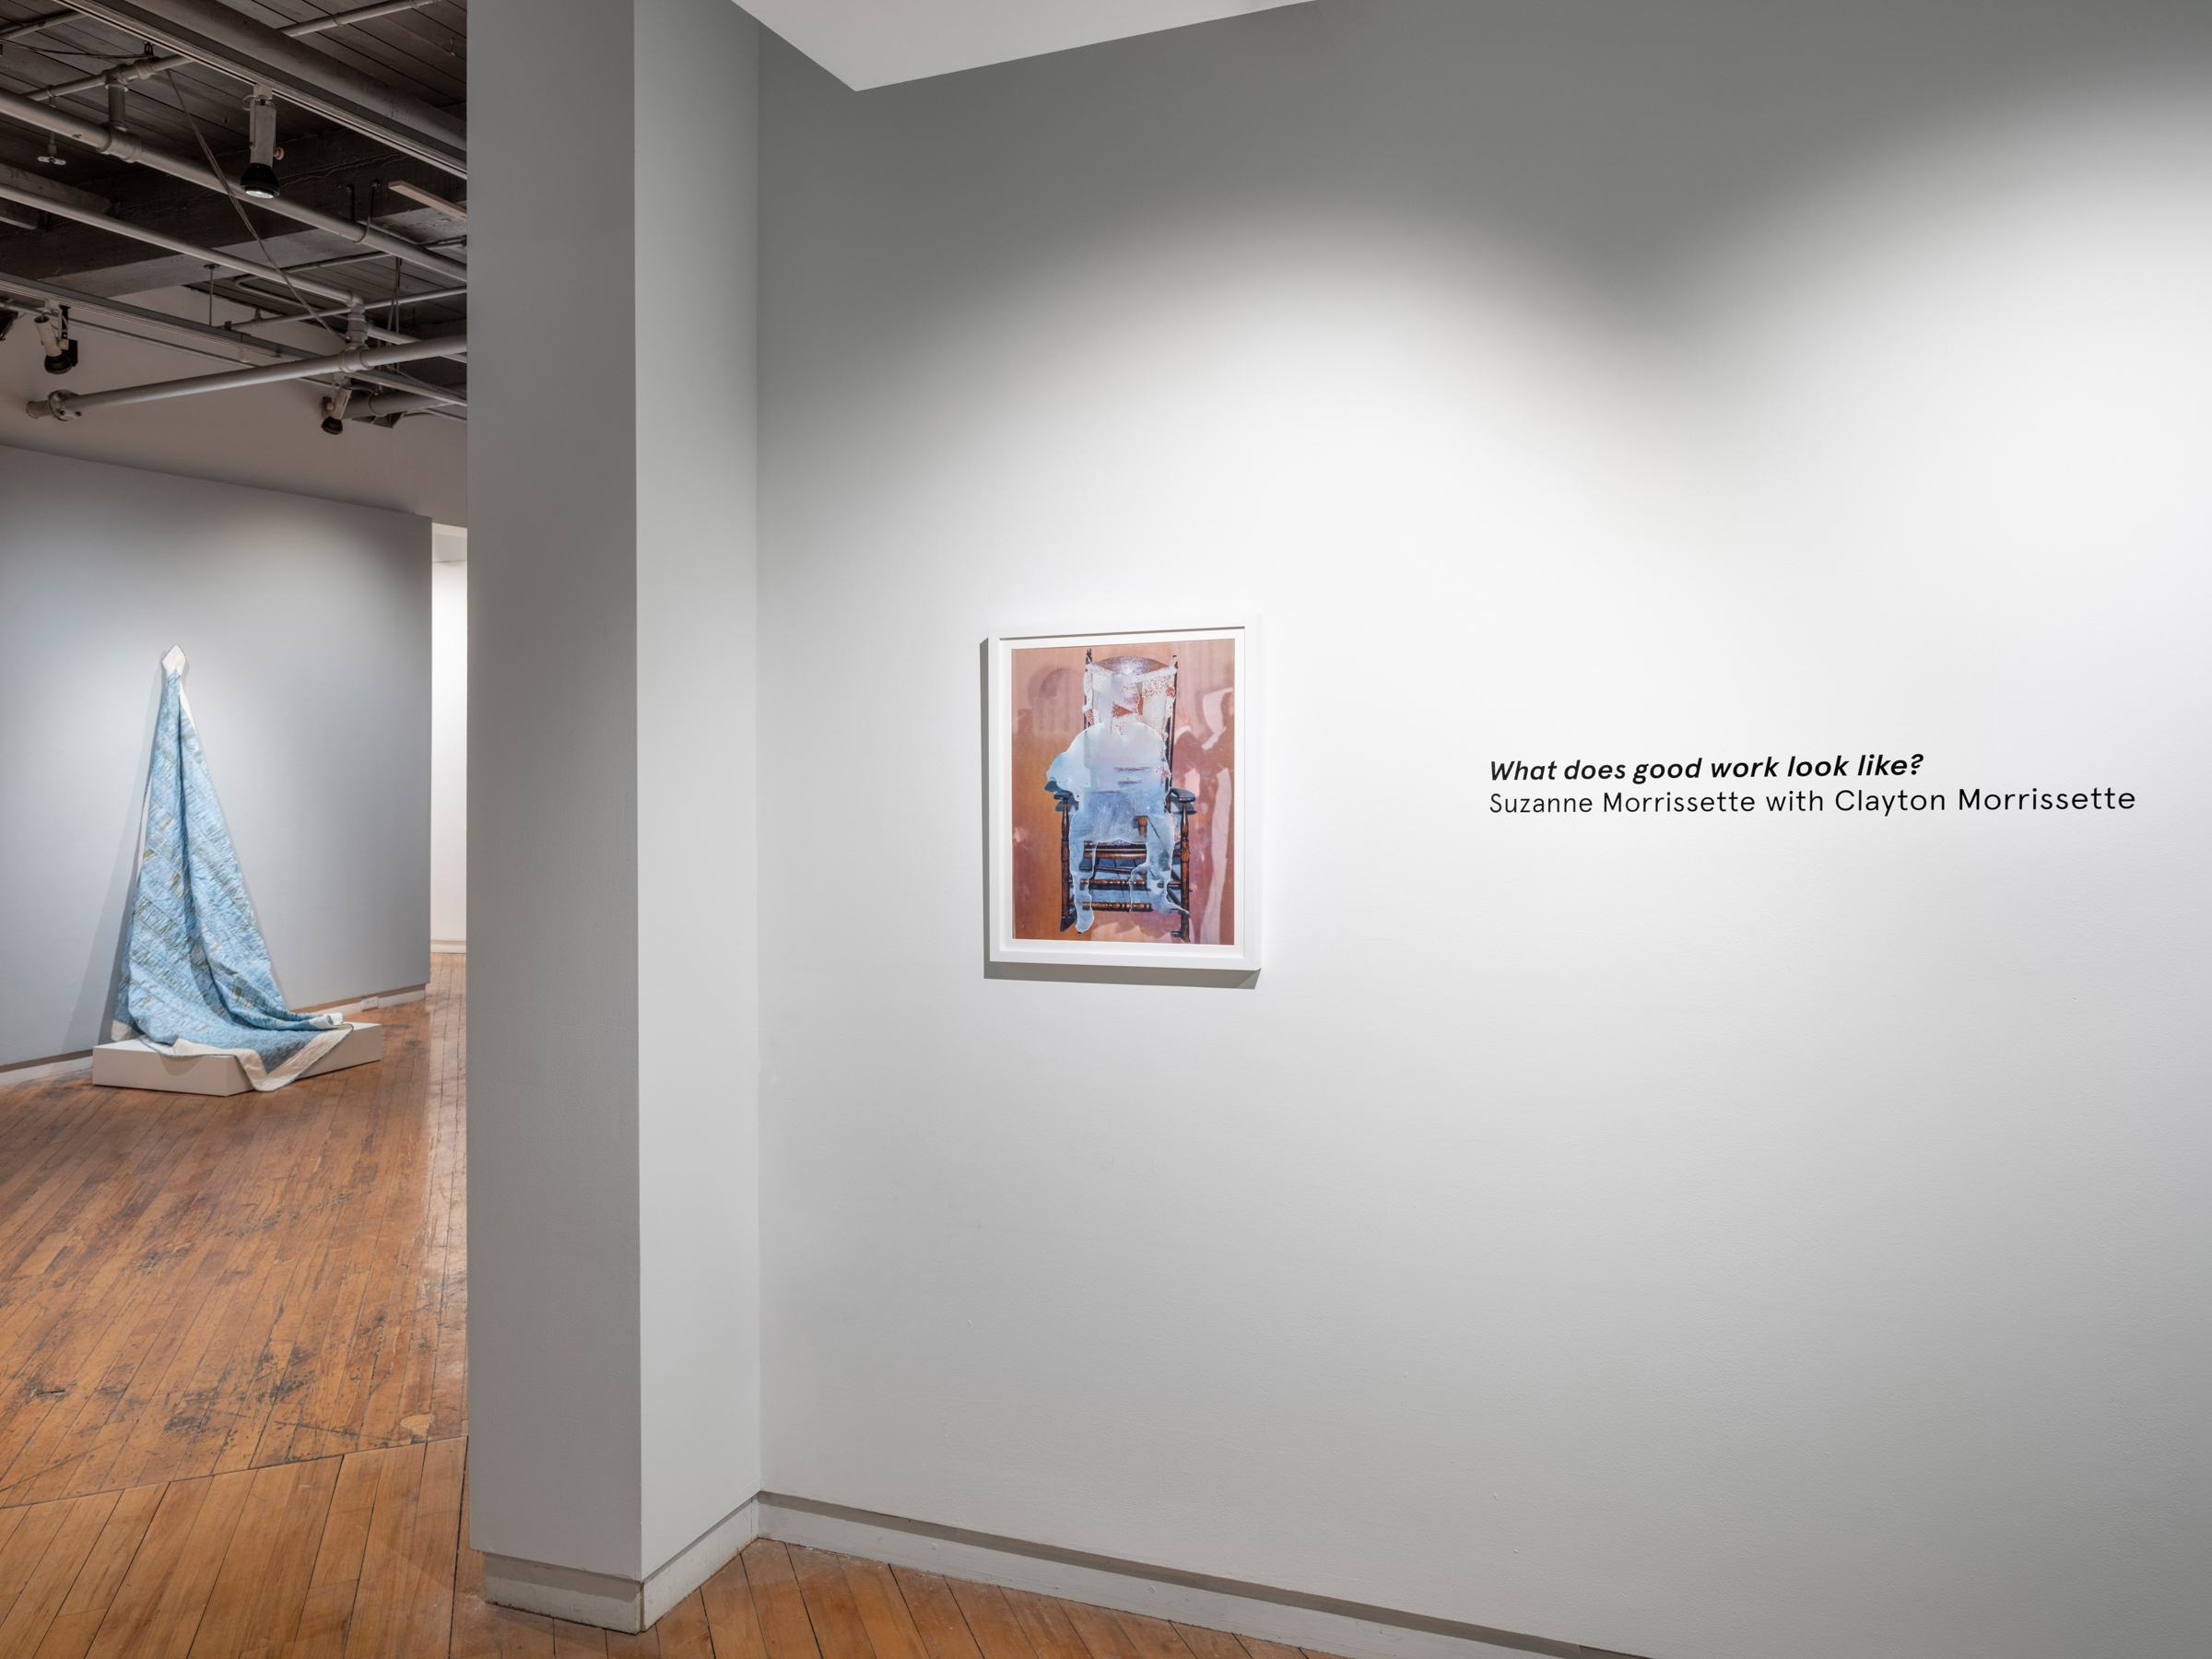     Suzanne Morrissette with Clayton Morrissette, What does good work look like?, installation view, Gallery 44 Centre for Contemporary Photography, 2022. Courtesy of the artist and Gallery 44. Photo: Darren Rigo

